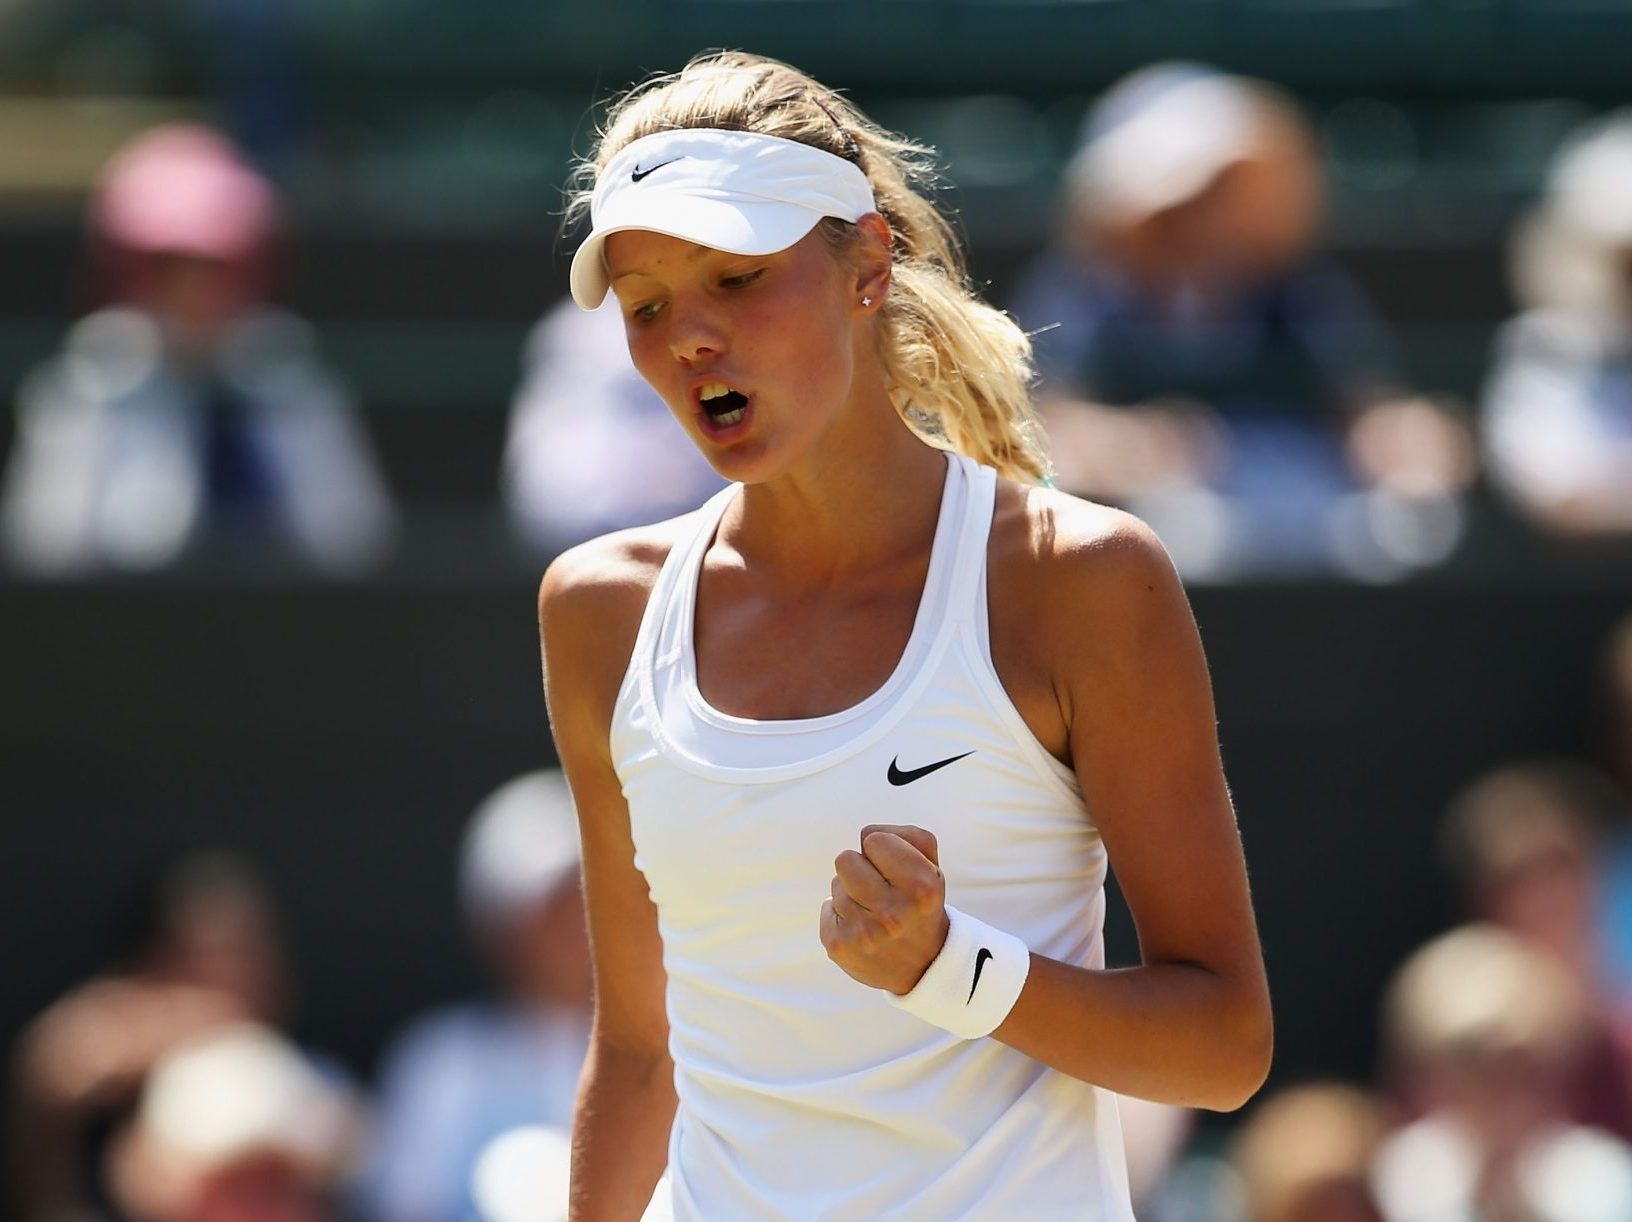 The 'ridiculous' rule that has players going bra-less at Wimbledon